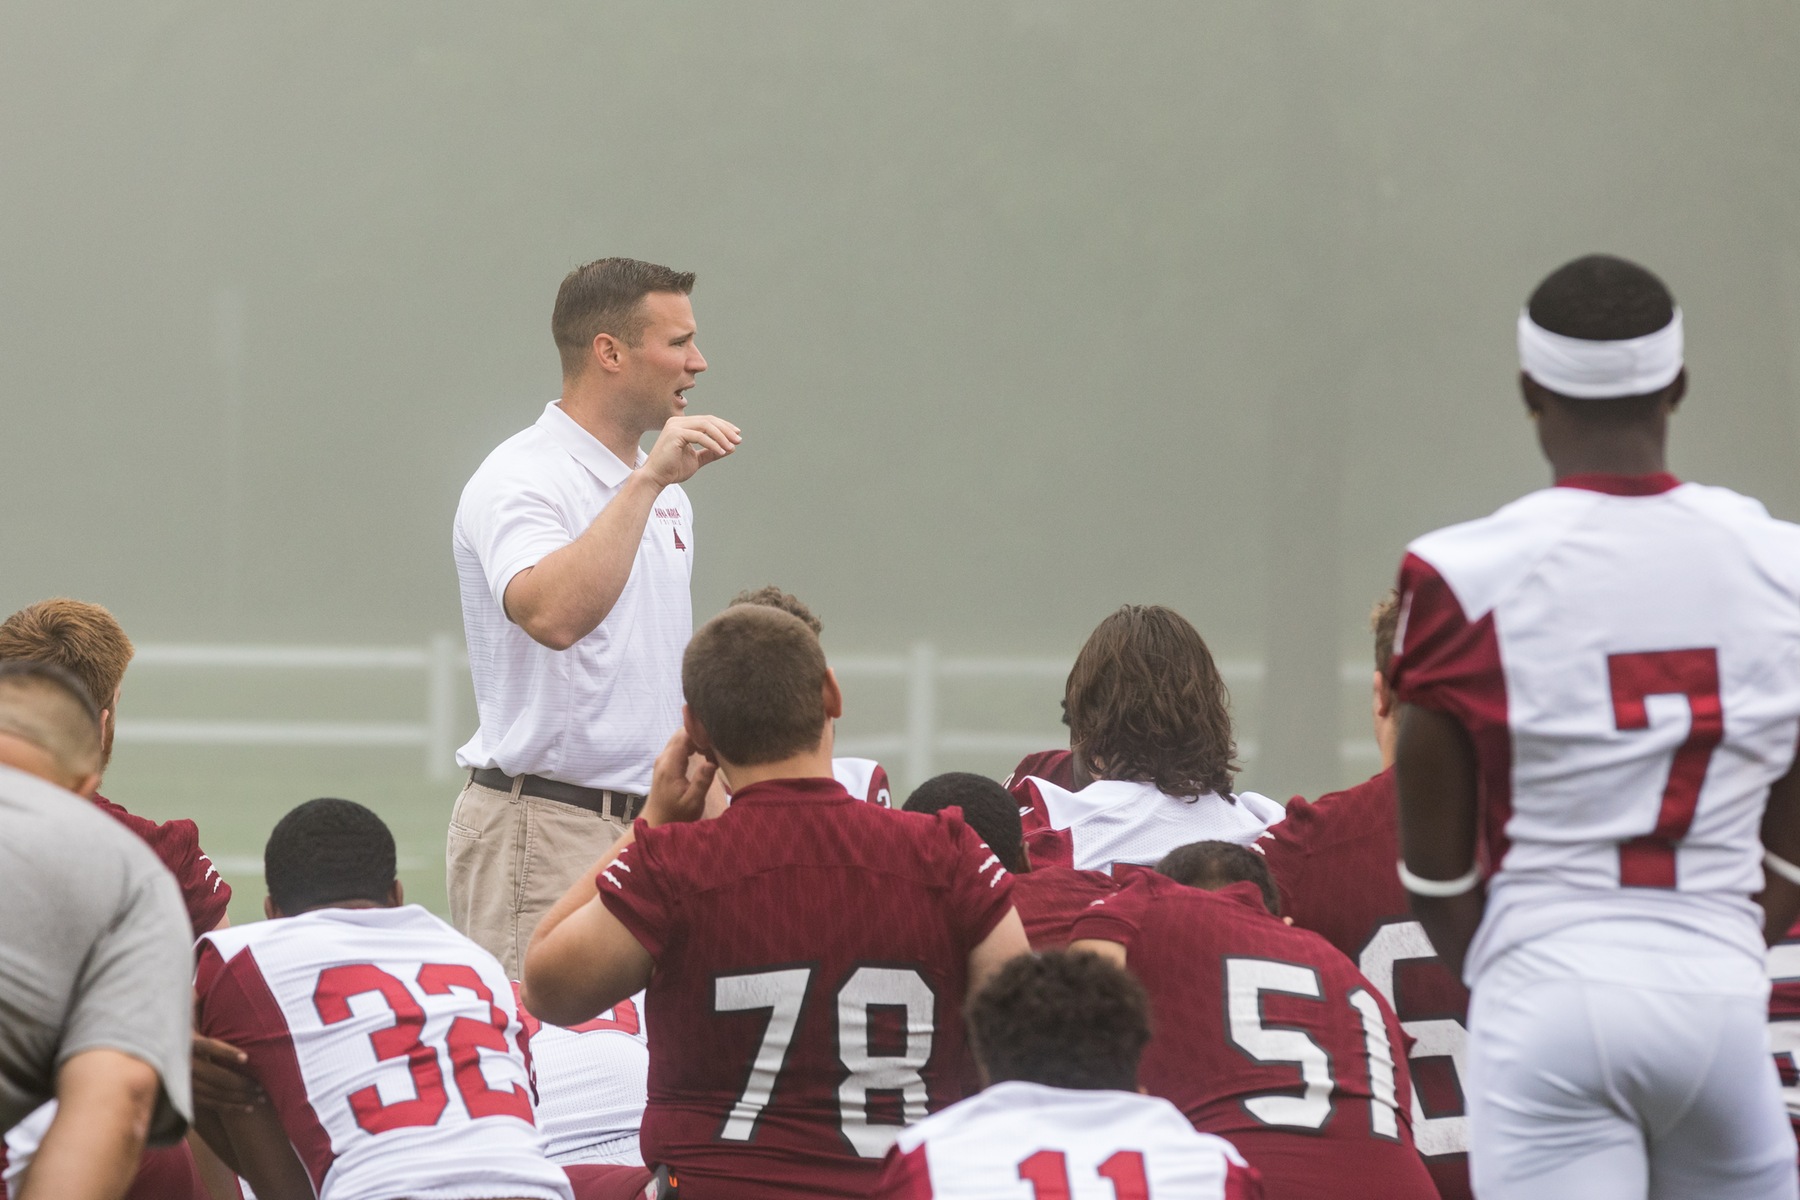 Head Coach Dan Mulrooney on Noontime Sports "Football Friday" Podcast